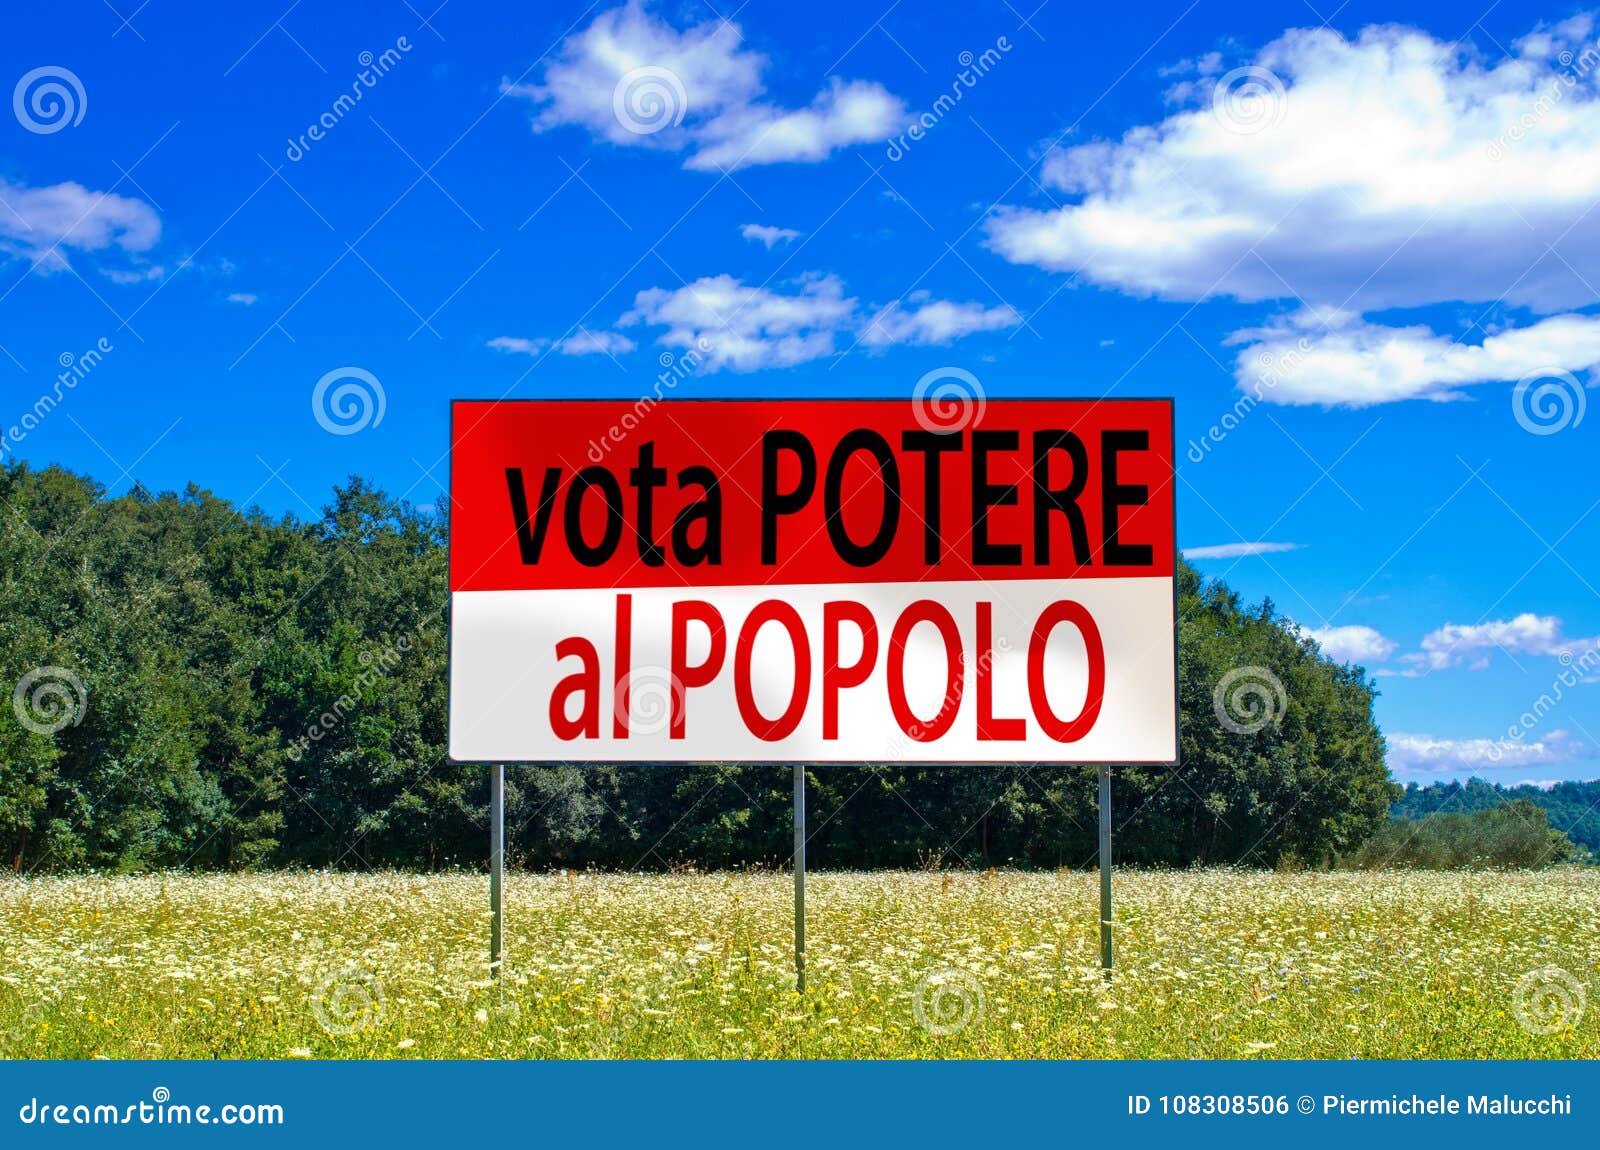 in the next elections save italy, vote potere al popolo